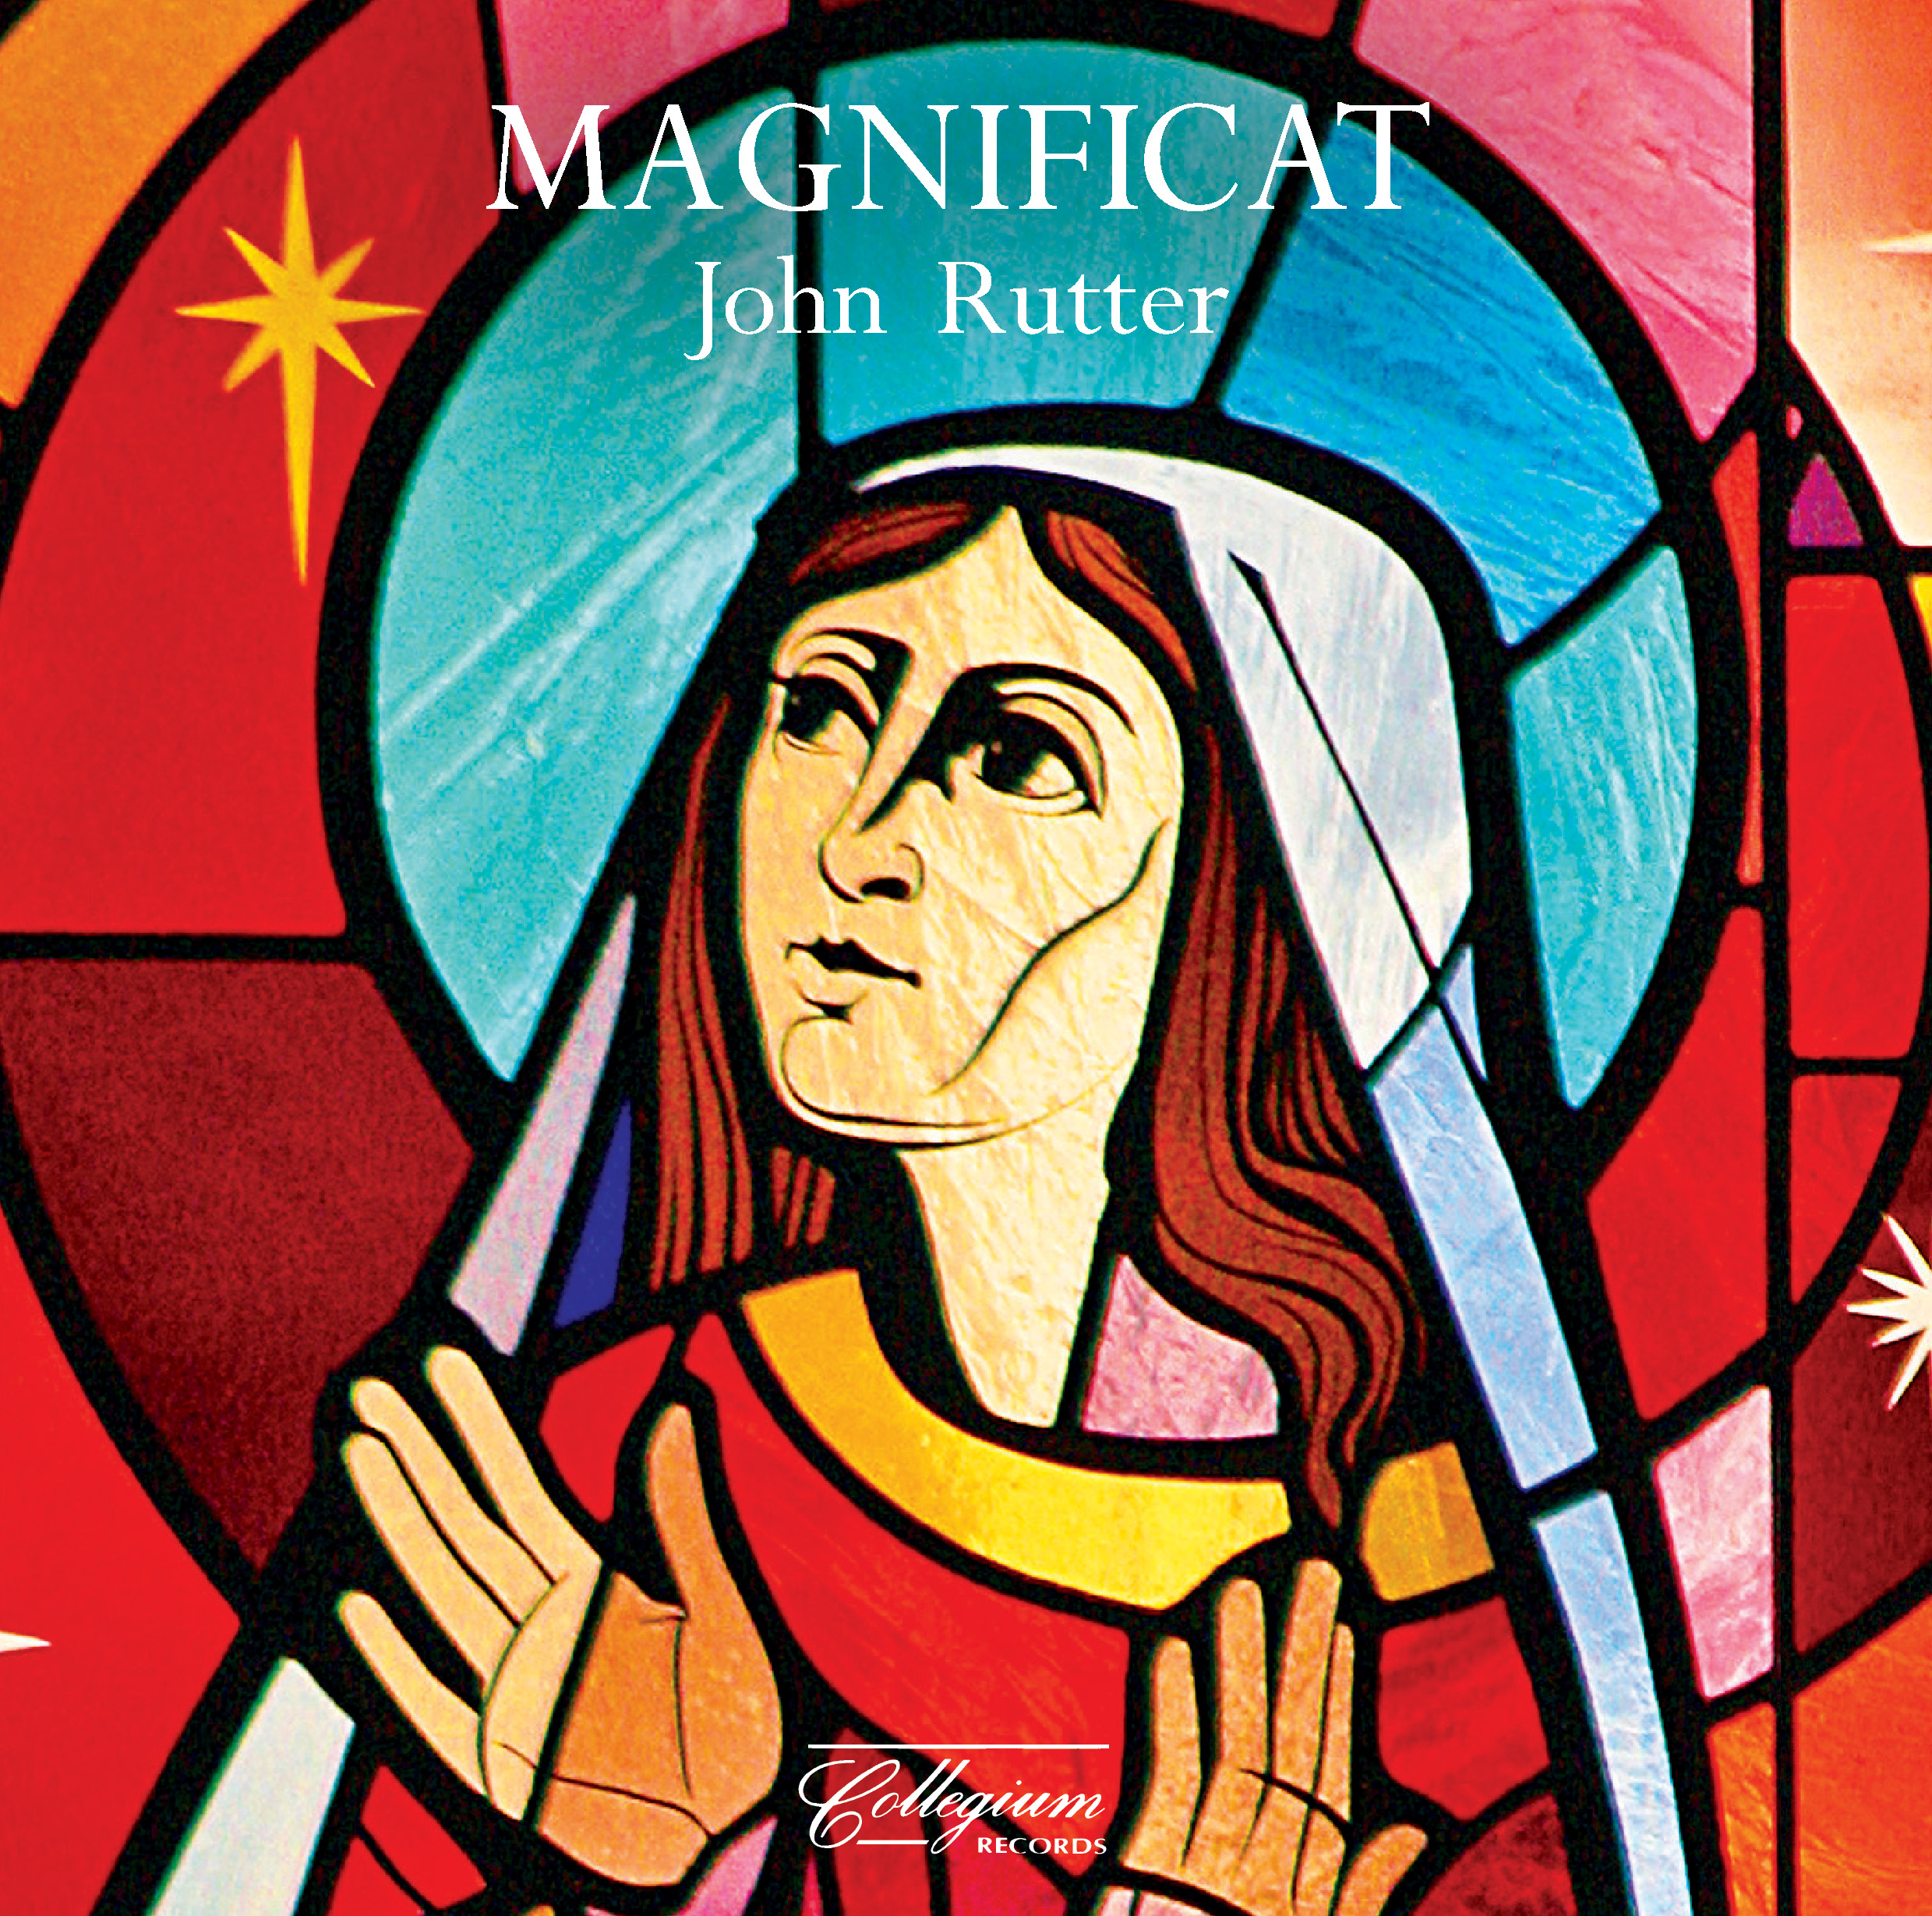 Magnificat: II. Of a Rose, a Lovely Rose